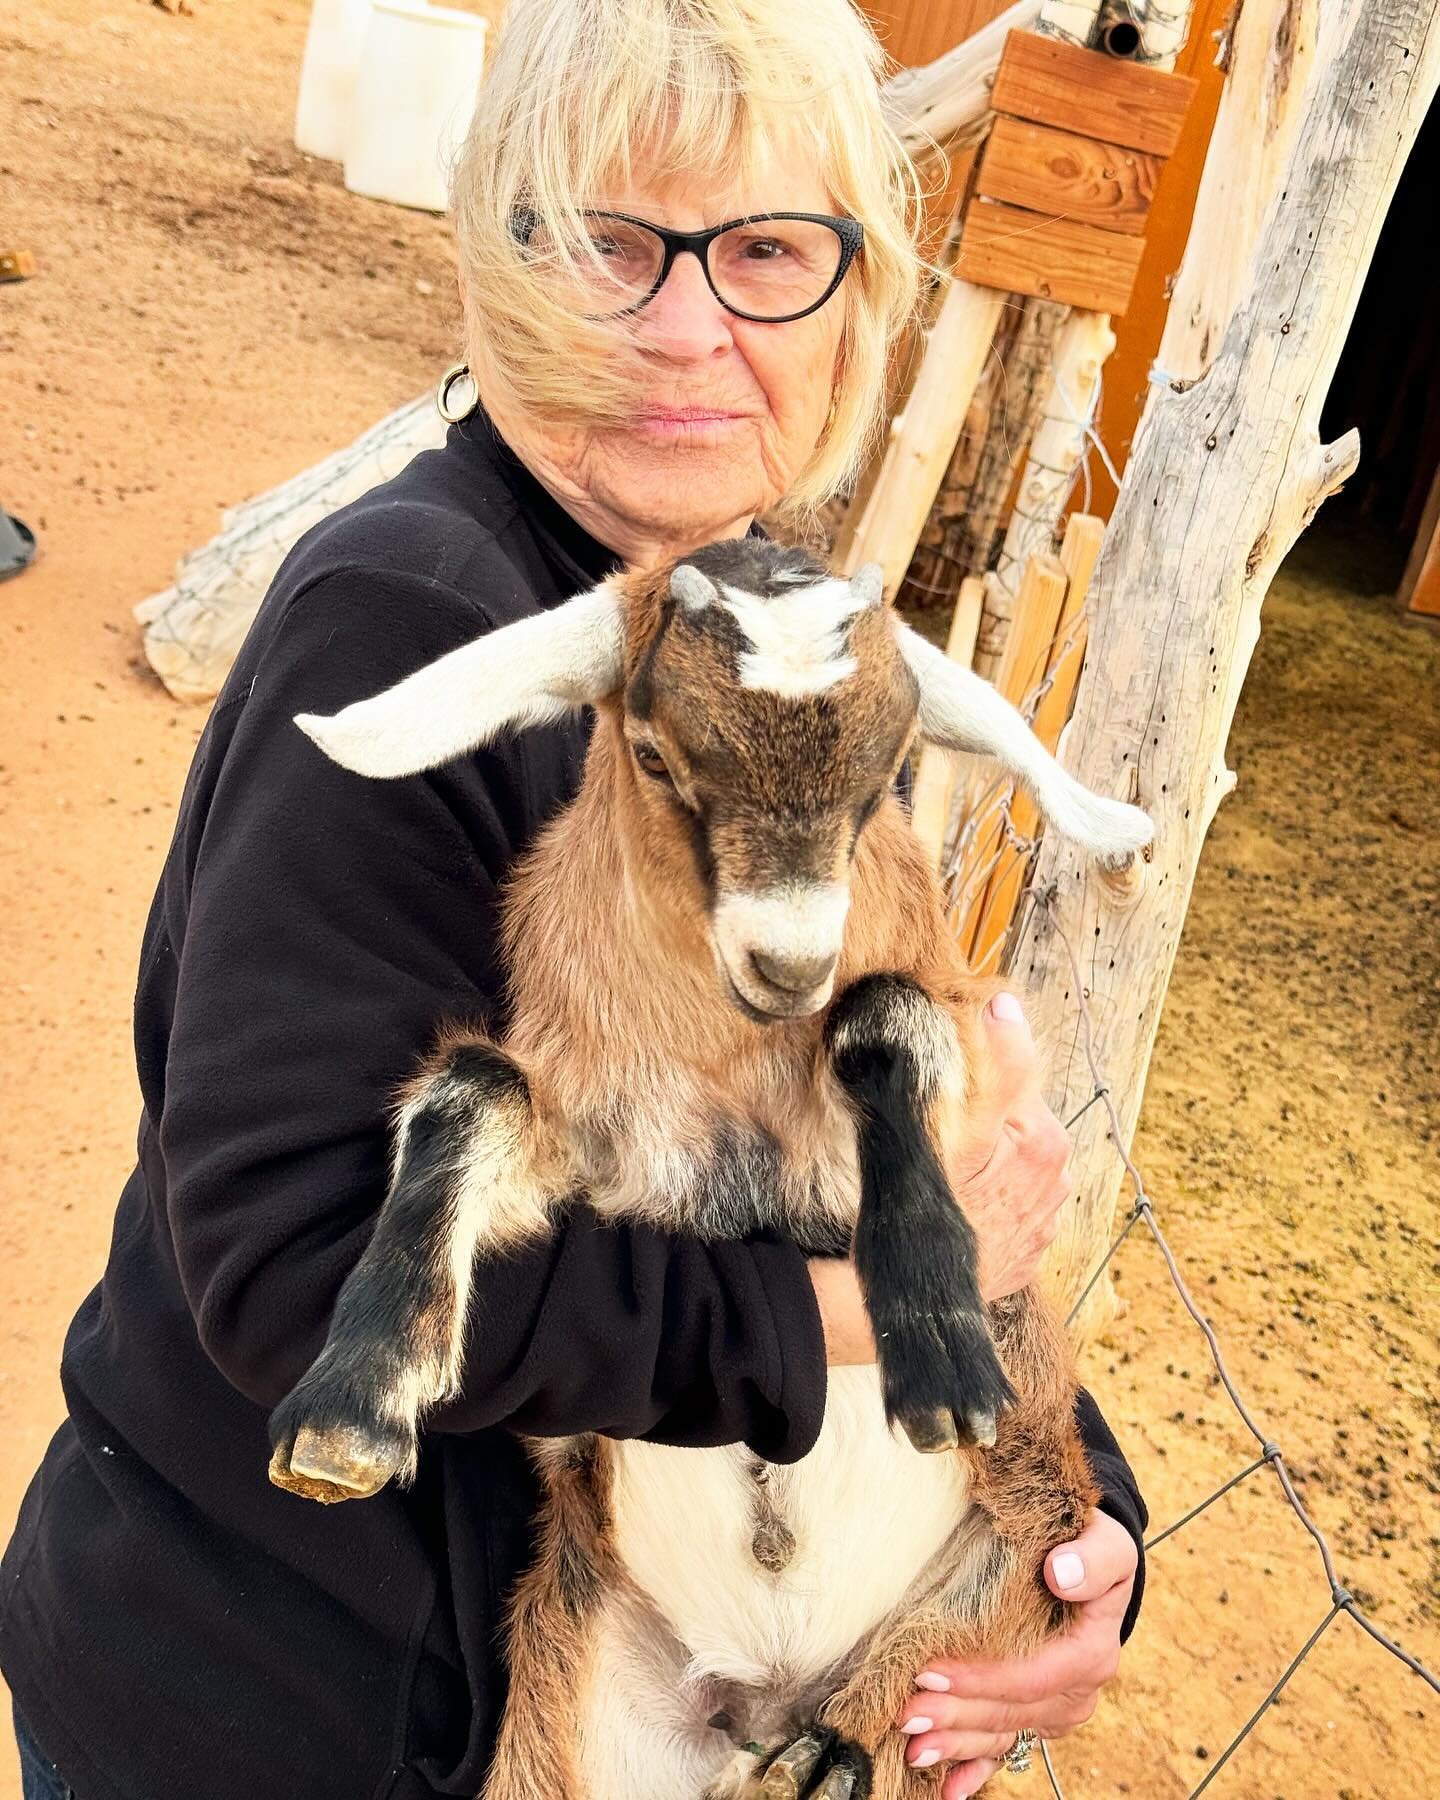 Taking a short break from work to spend some time with the baby goats.  They are so cute and entertaining.